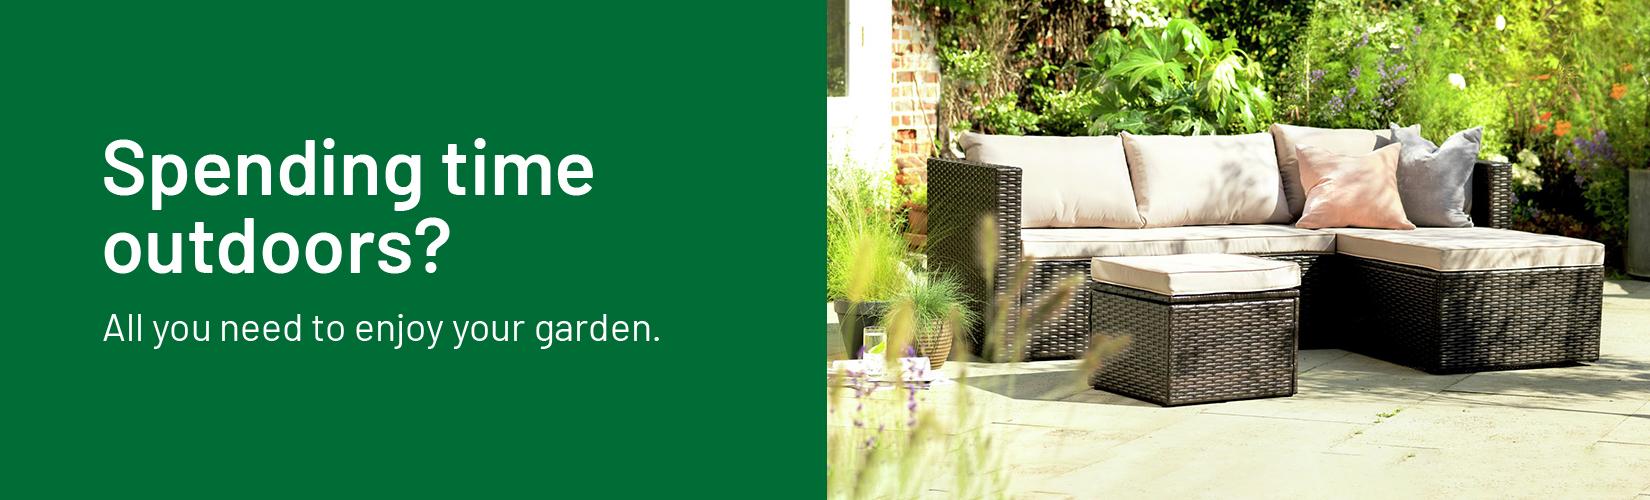 Spending time outdoors? All you need to enjoy your garden.